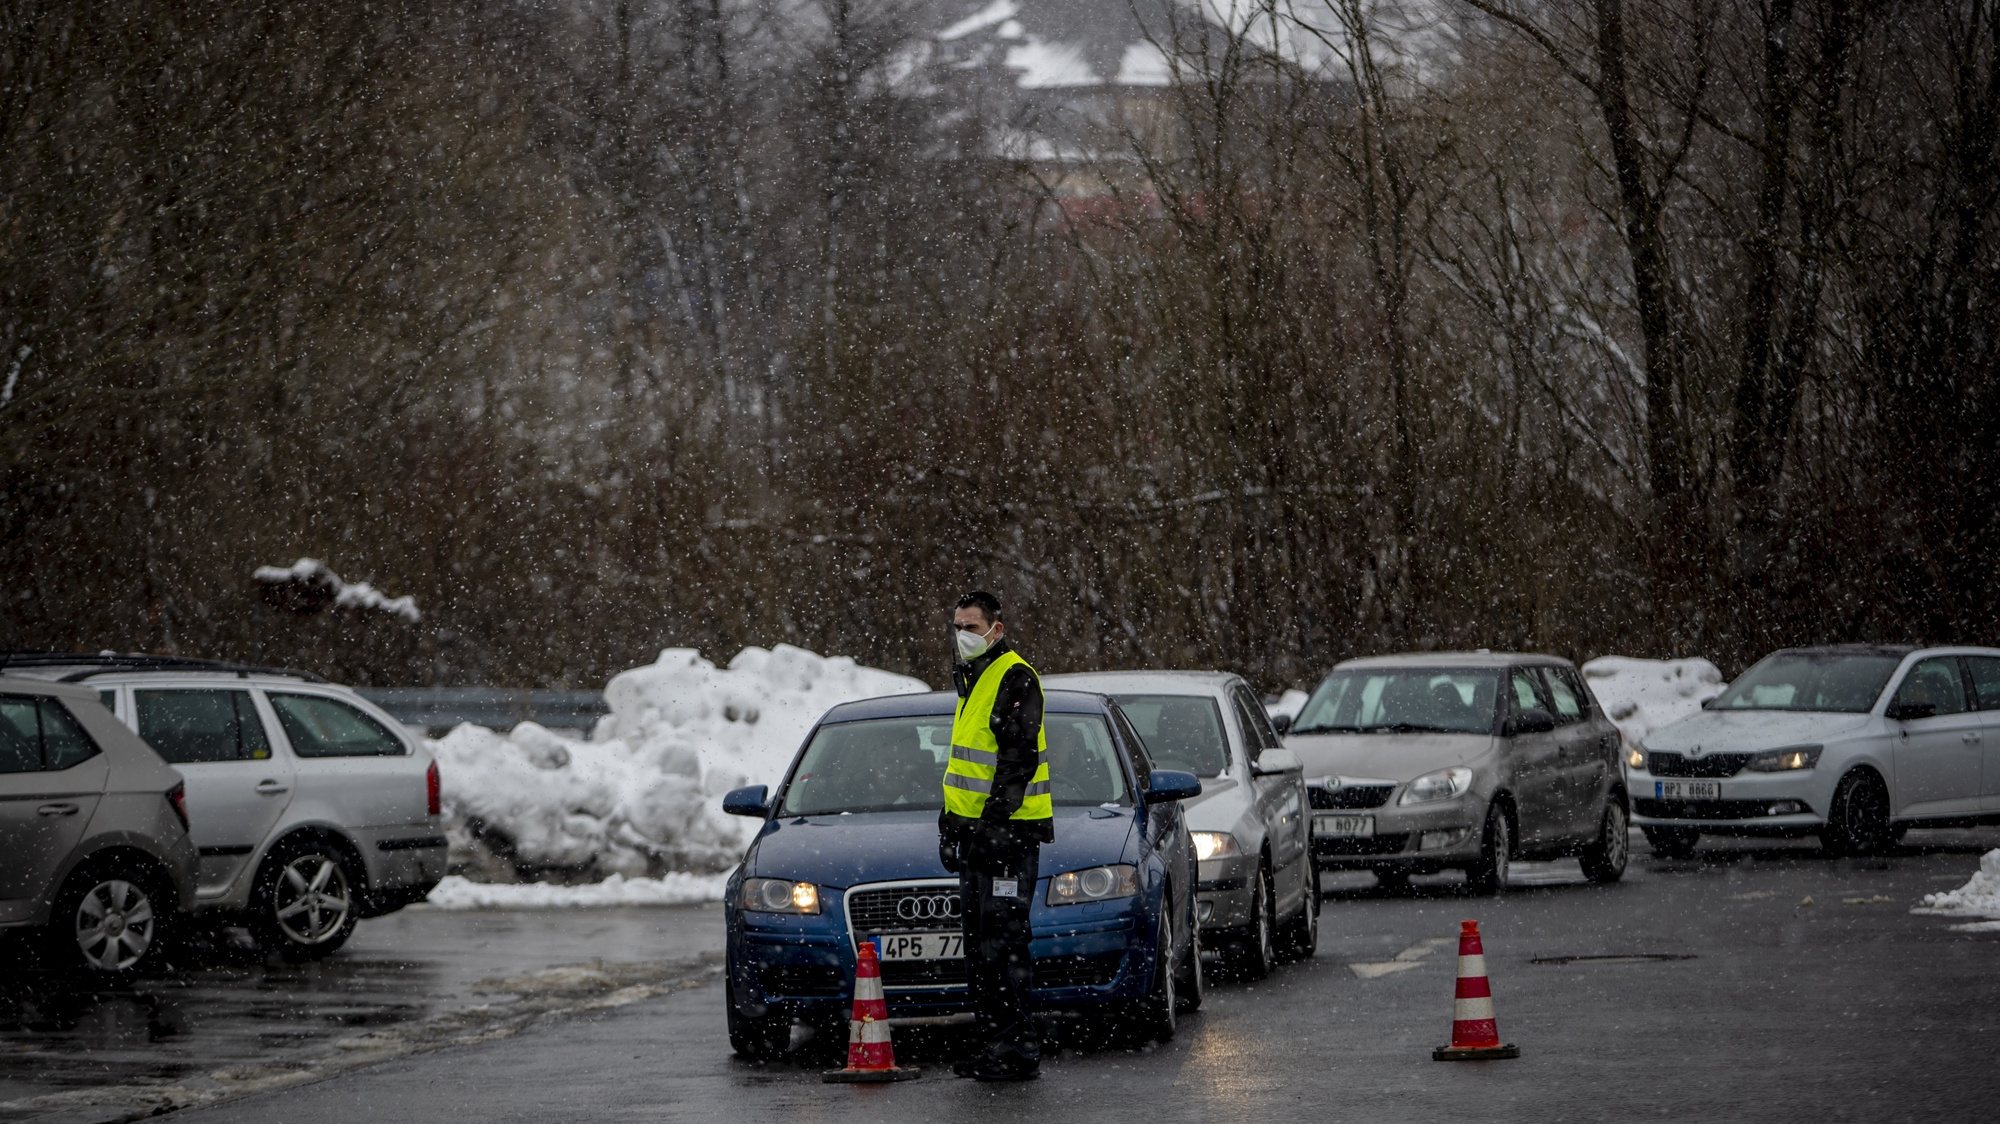 epa08964255 A security member stops car with cross-border workers as they arrive for Covid-19 antigen testing at parking lot in Folmava, Czech-Germany border, 25 January 2021. Germany put the Czech Republic in the list of COVID-19 high-risk countries, implementing stricter measures for cross-border commuters from 24 January 2020. When traveling to Bavaria, cross-border workers must now produce a negative test every two days, resulting in long queues at border crossings.  EPA/MARTIN DIVISEK